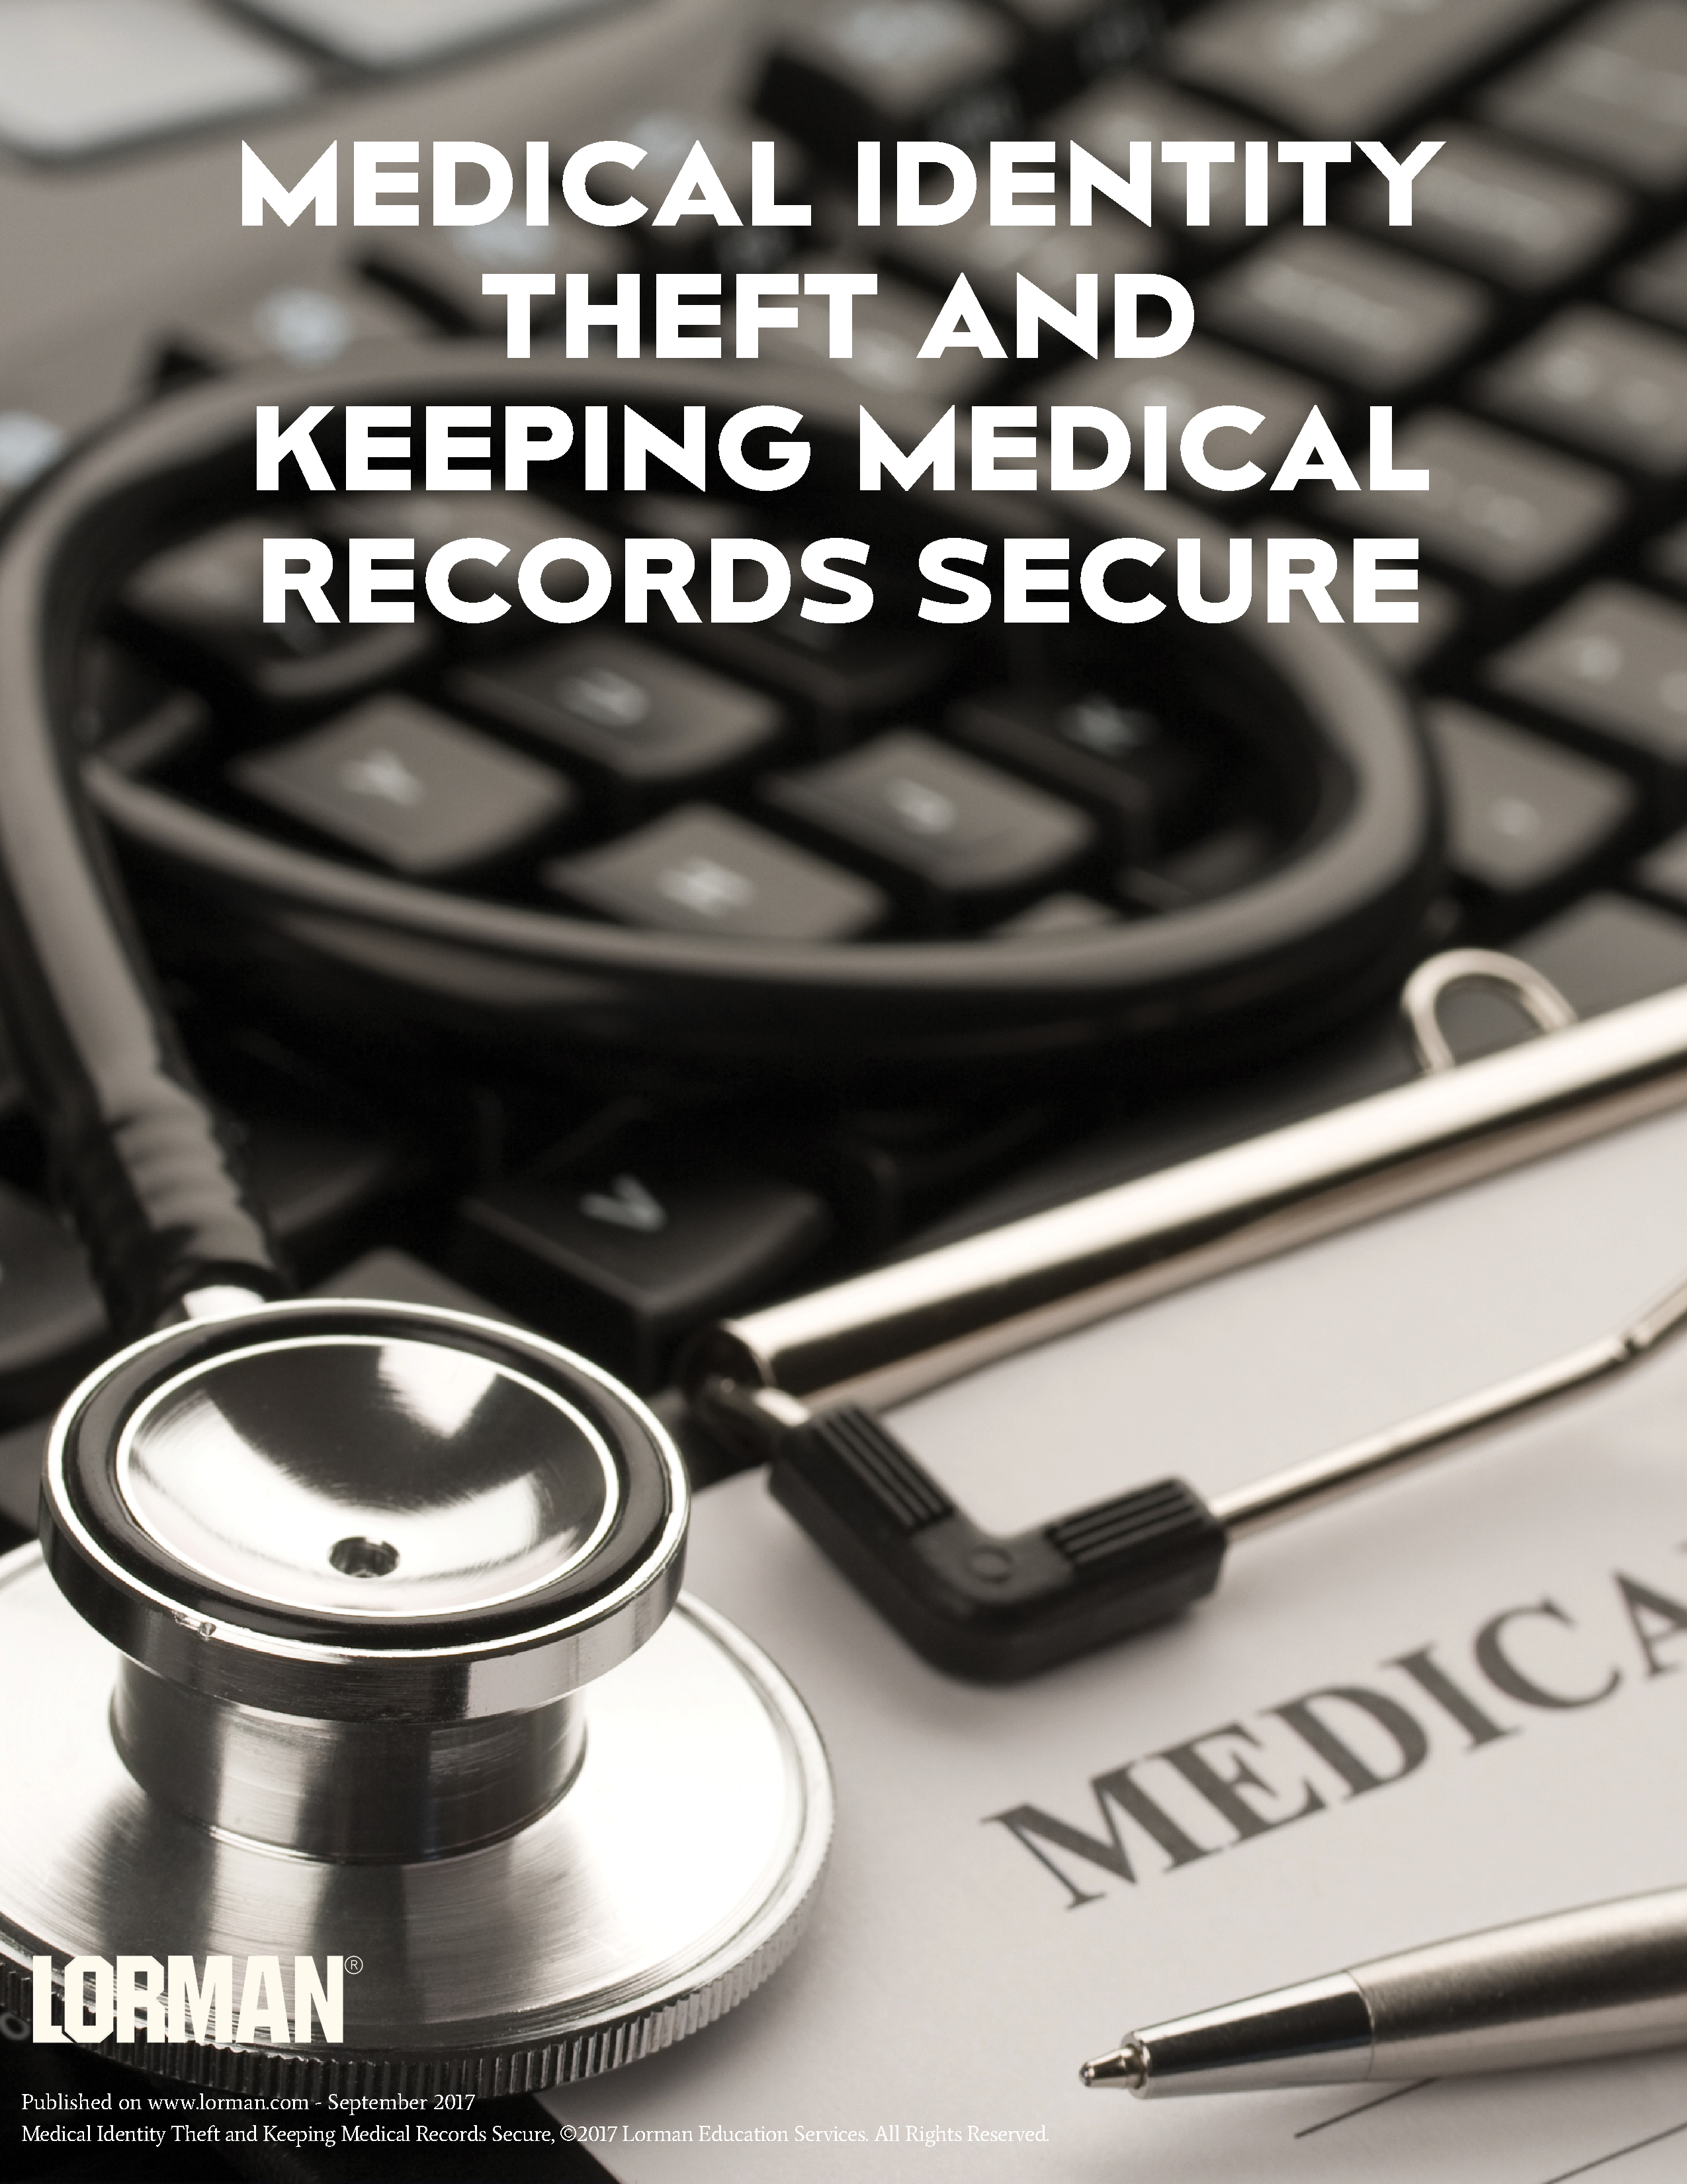 Medical Identity Theft and Keeping Medical Records Secure